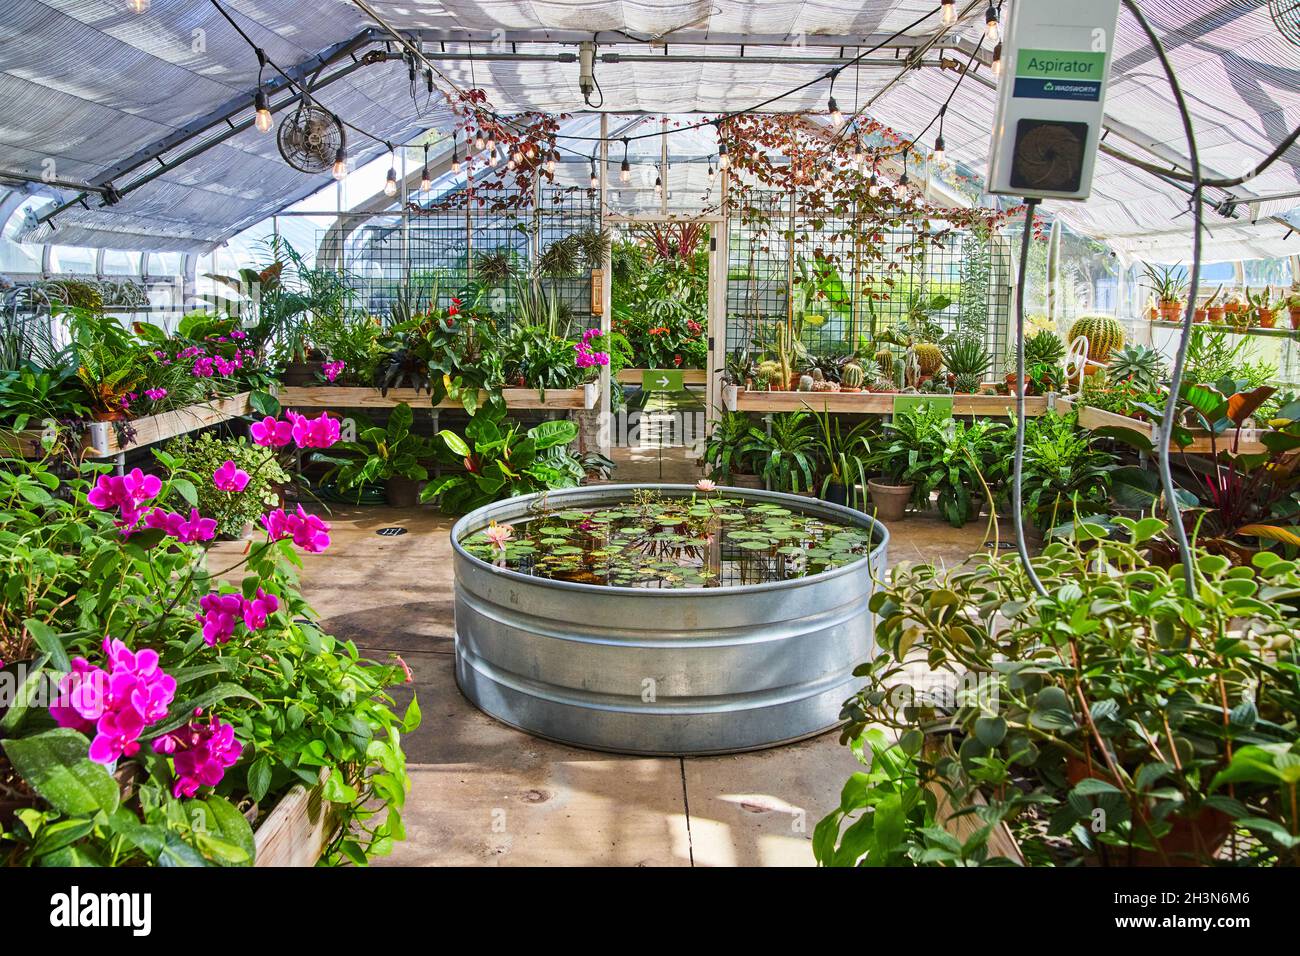 Greenhouse interior with beautiful lily pad pond surrounded by plants Stock Photo